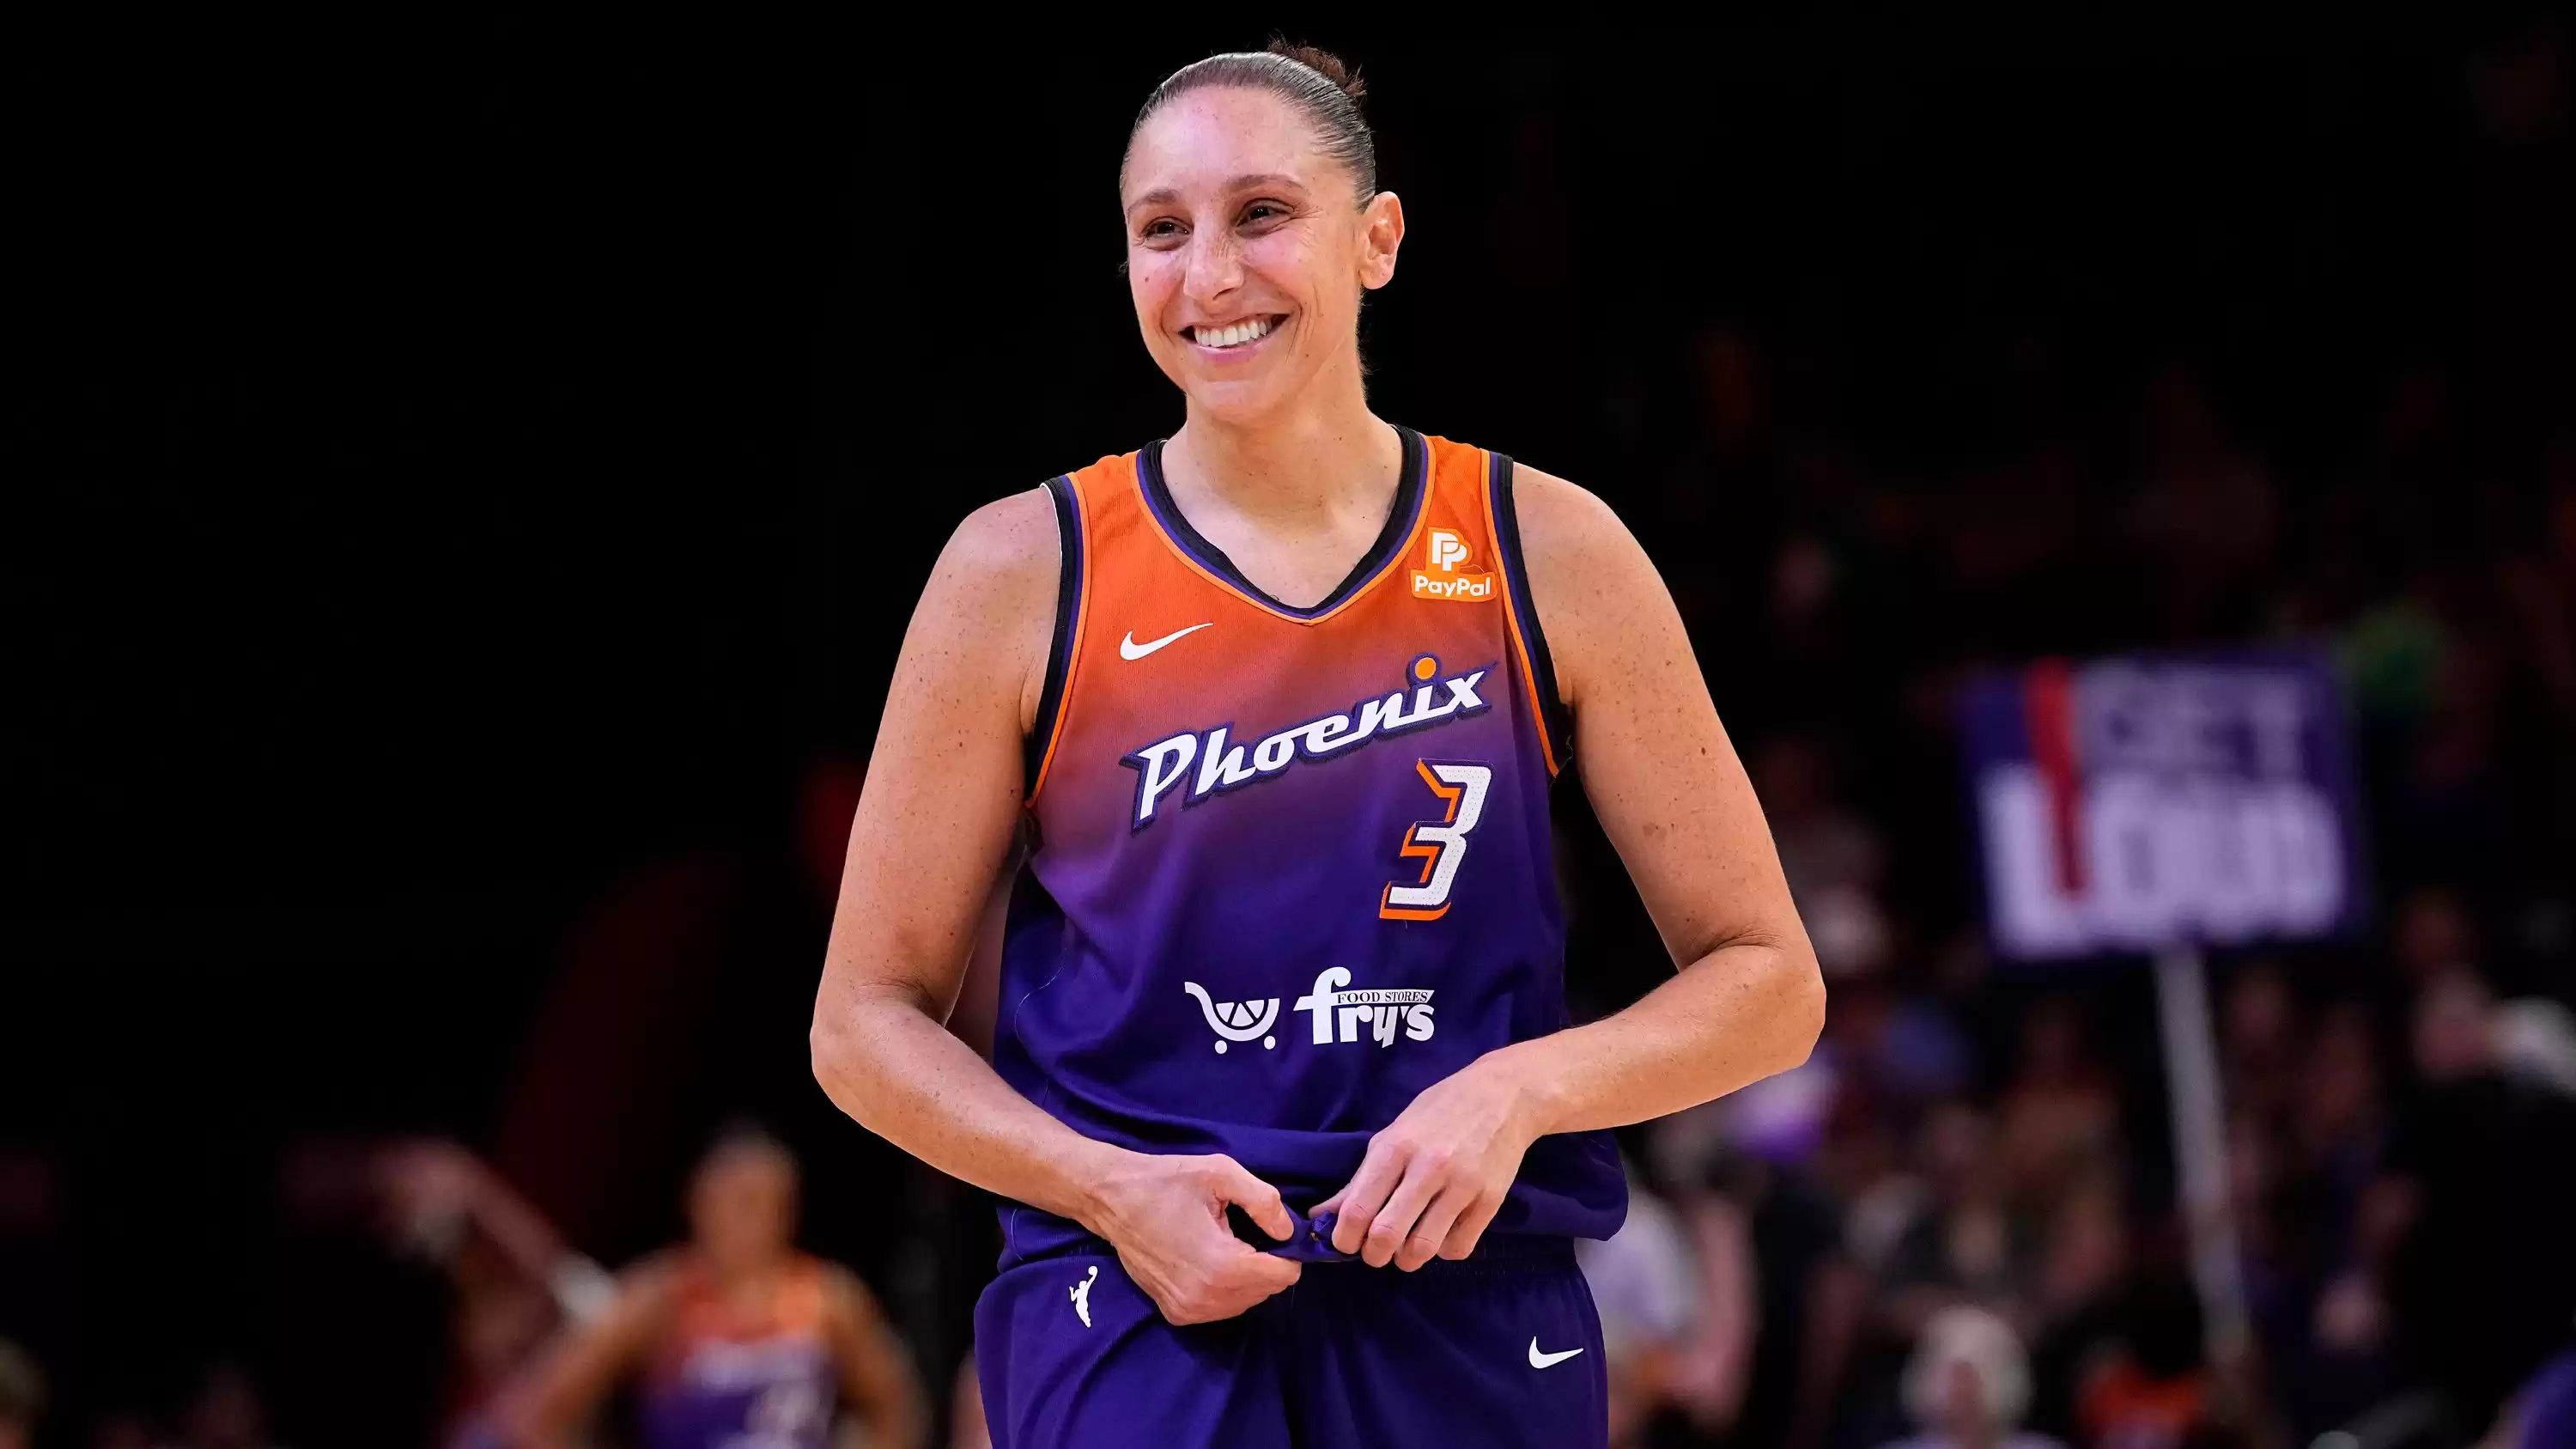 WNBA star Diana Taurasi sets record with 10,000 career points